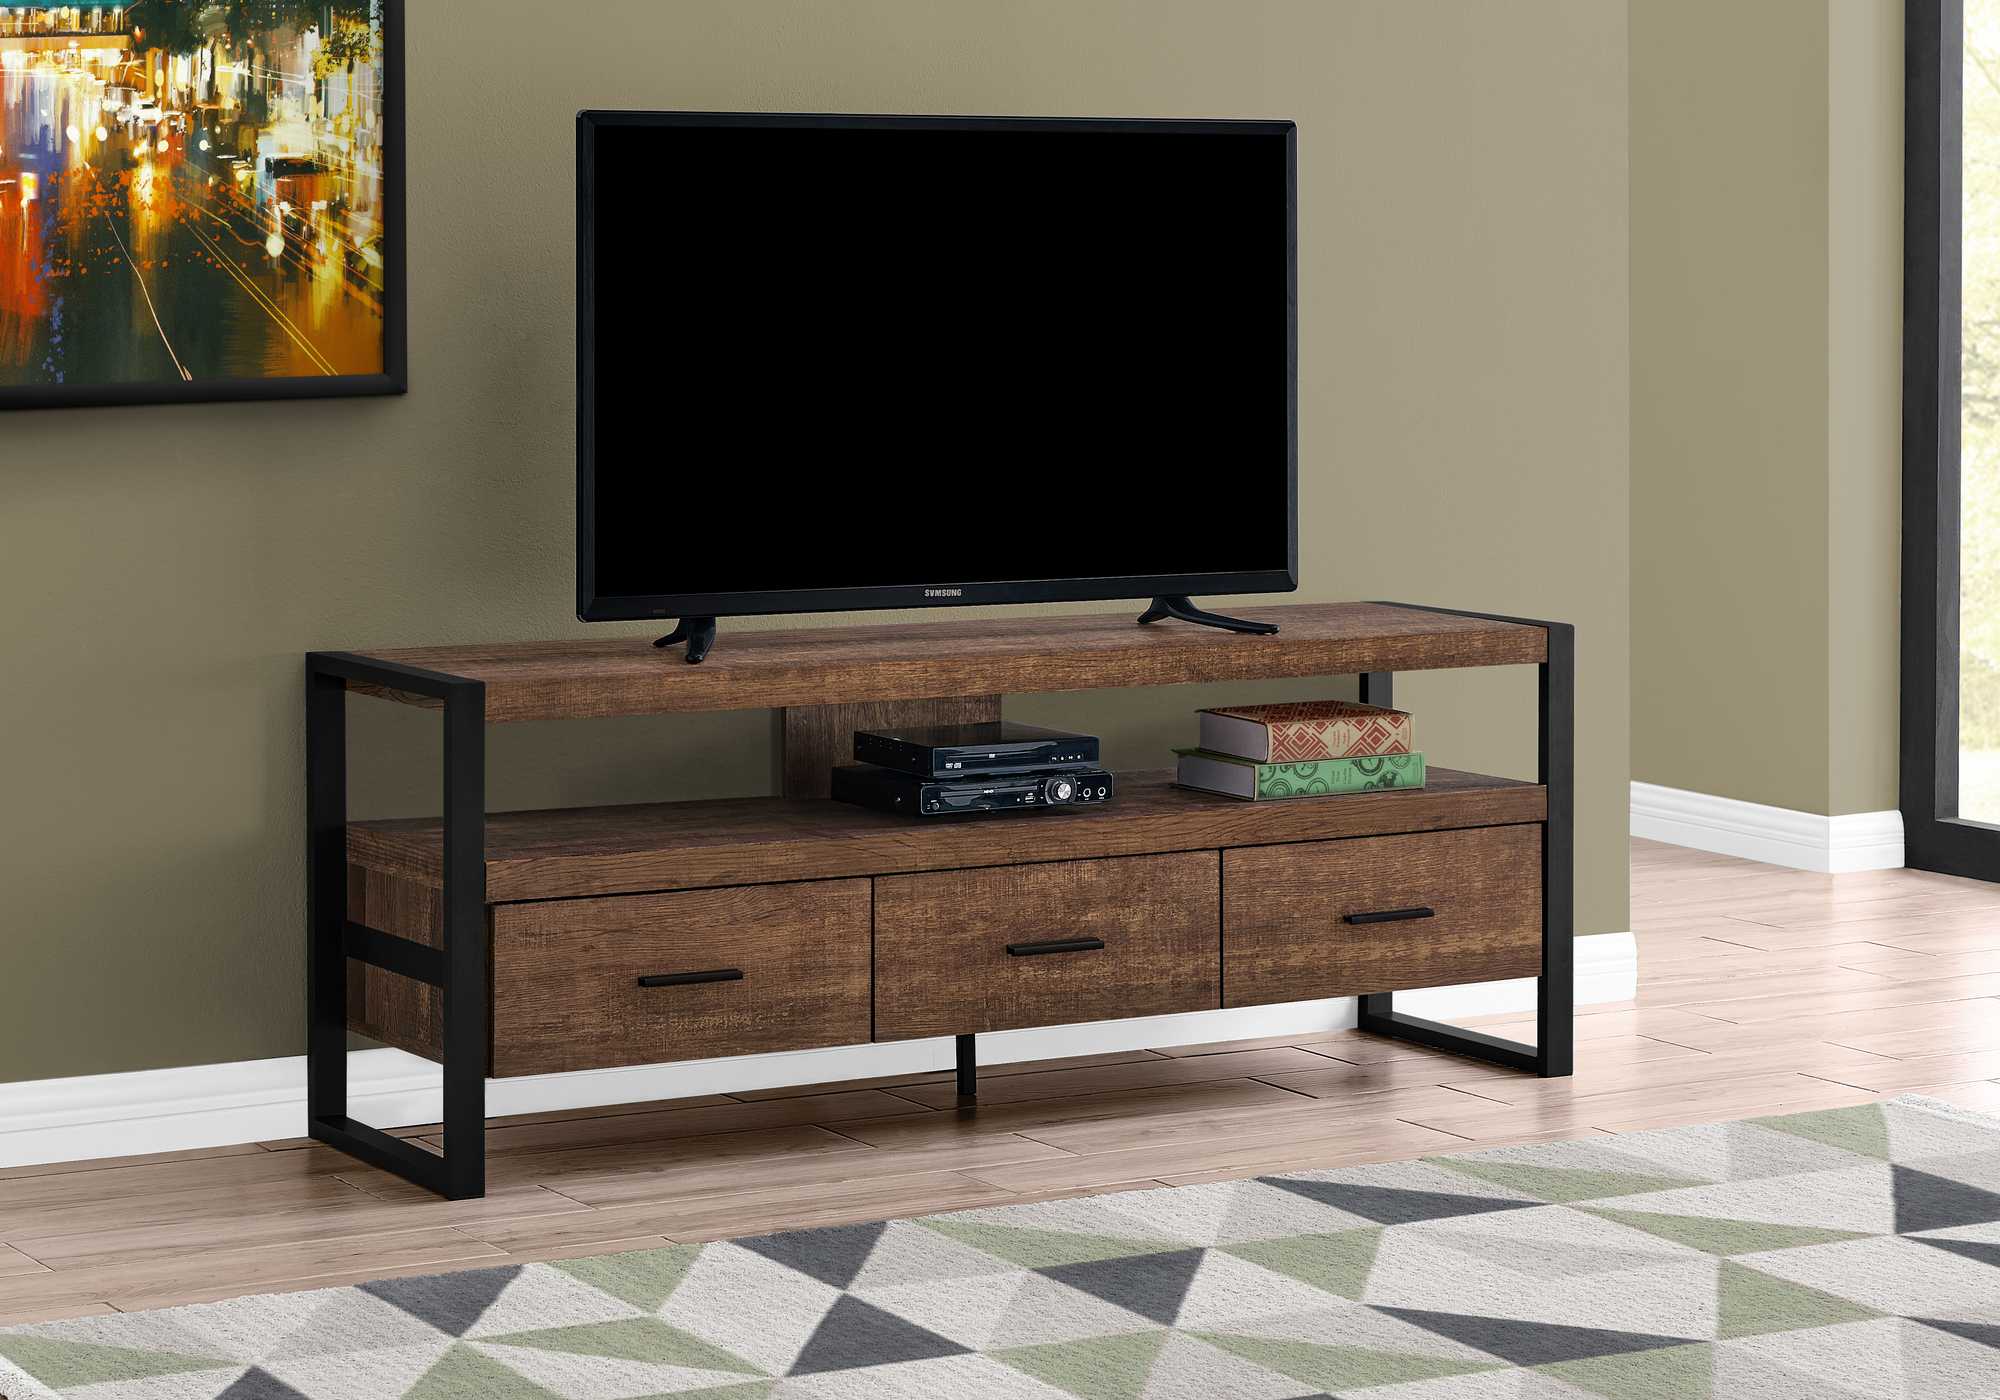 15.5" X 59" X 21.75" Taupe Black Particle Board Hollow Core Metal TV Stand With 3 Drawers